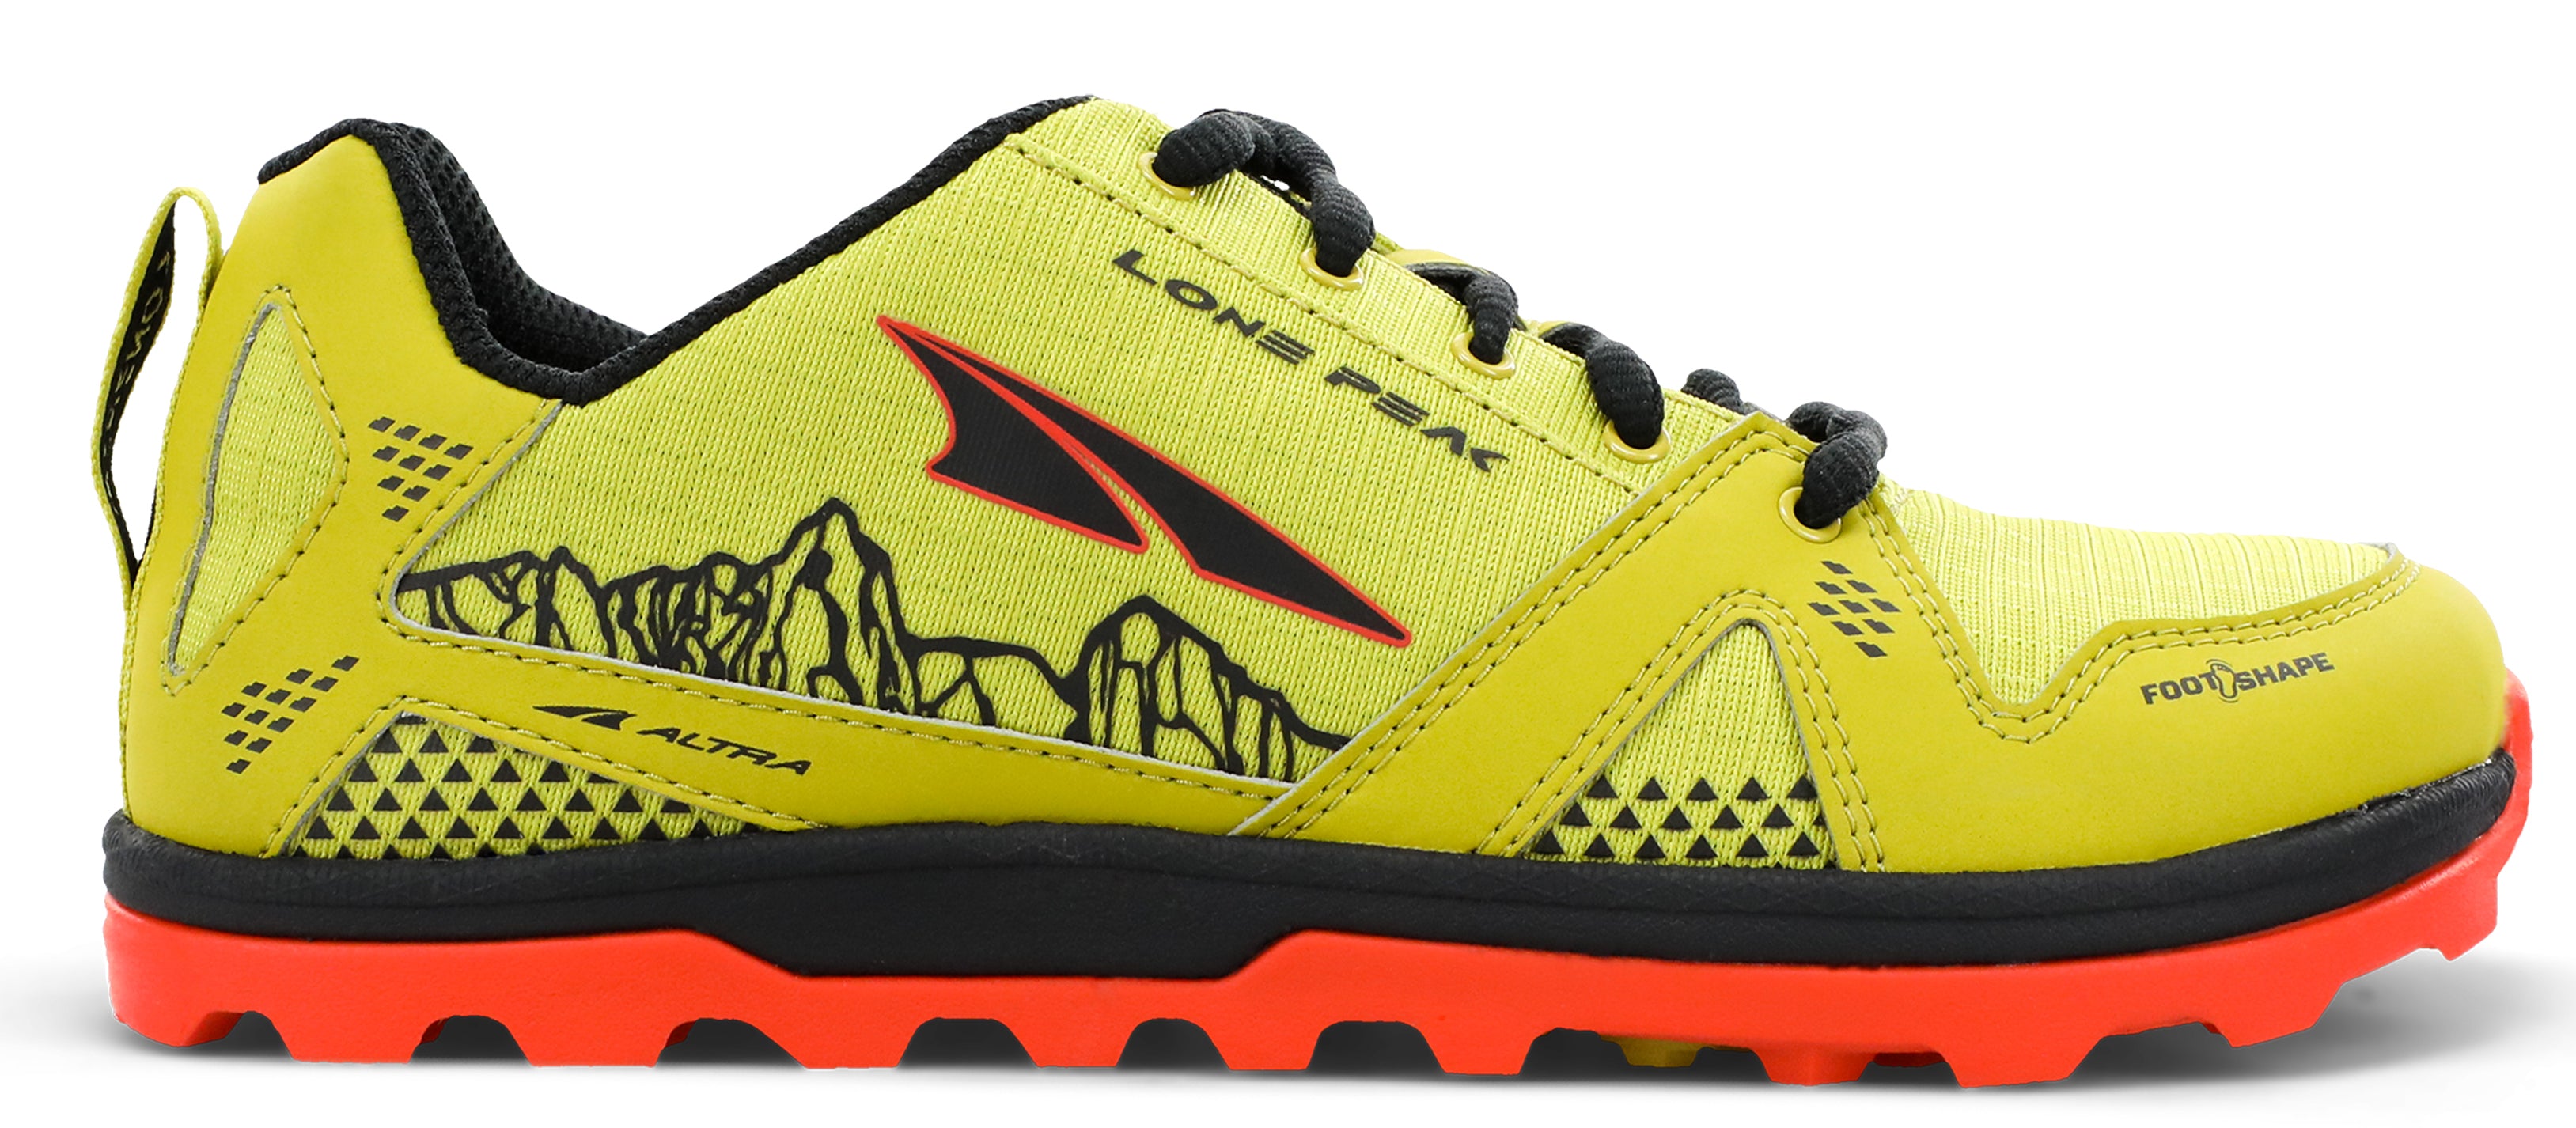 Altra Kid's Youth Lone Peak Trail Running Shoe in Lime from the side